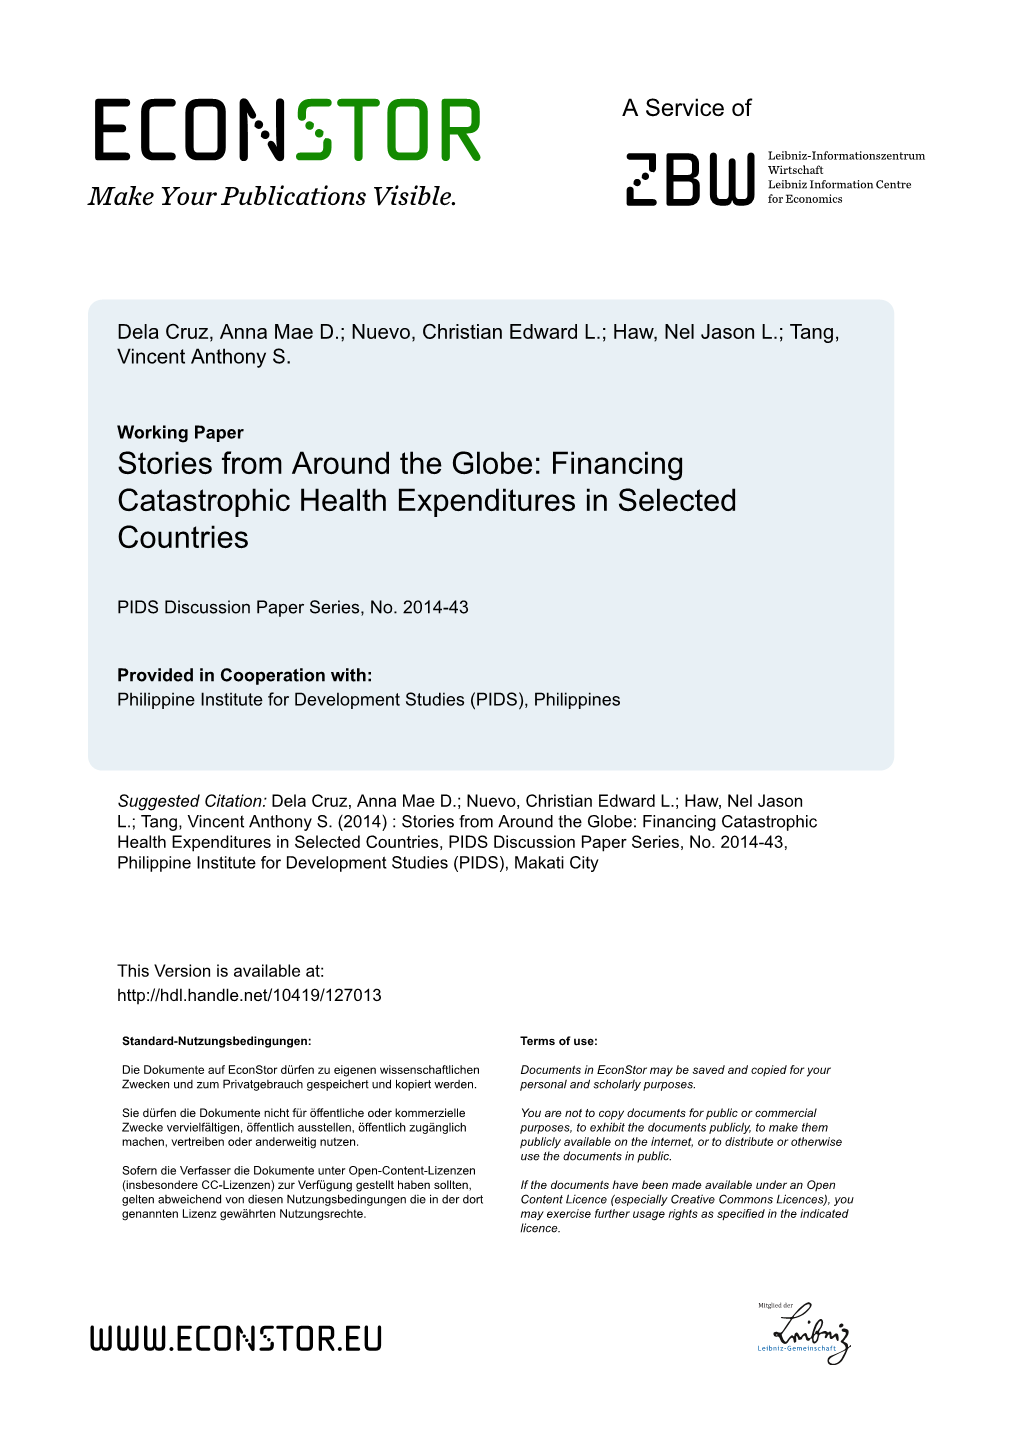 Financing Catastrophic Health Expenditures in Selected Countries